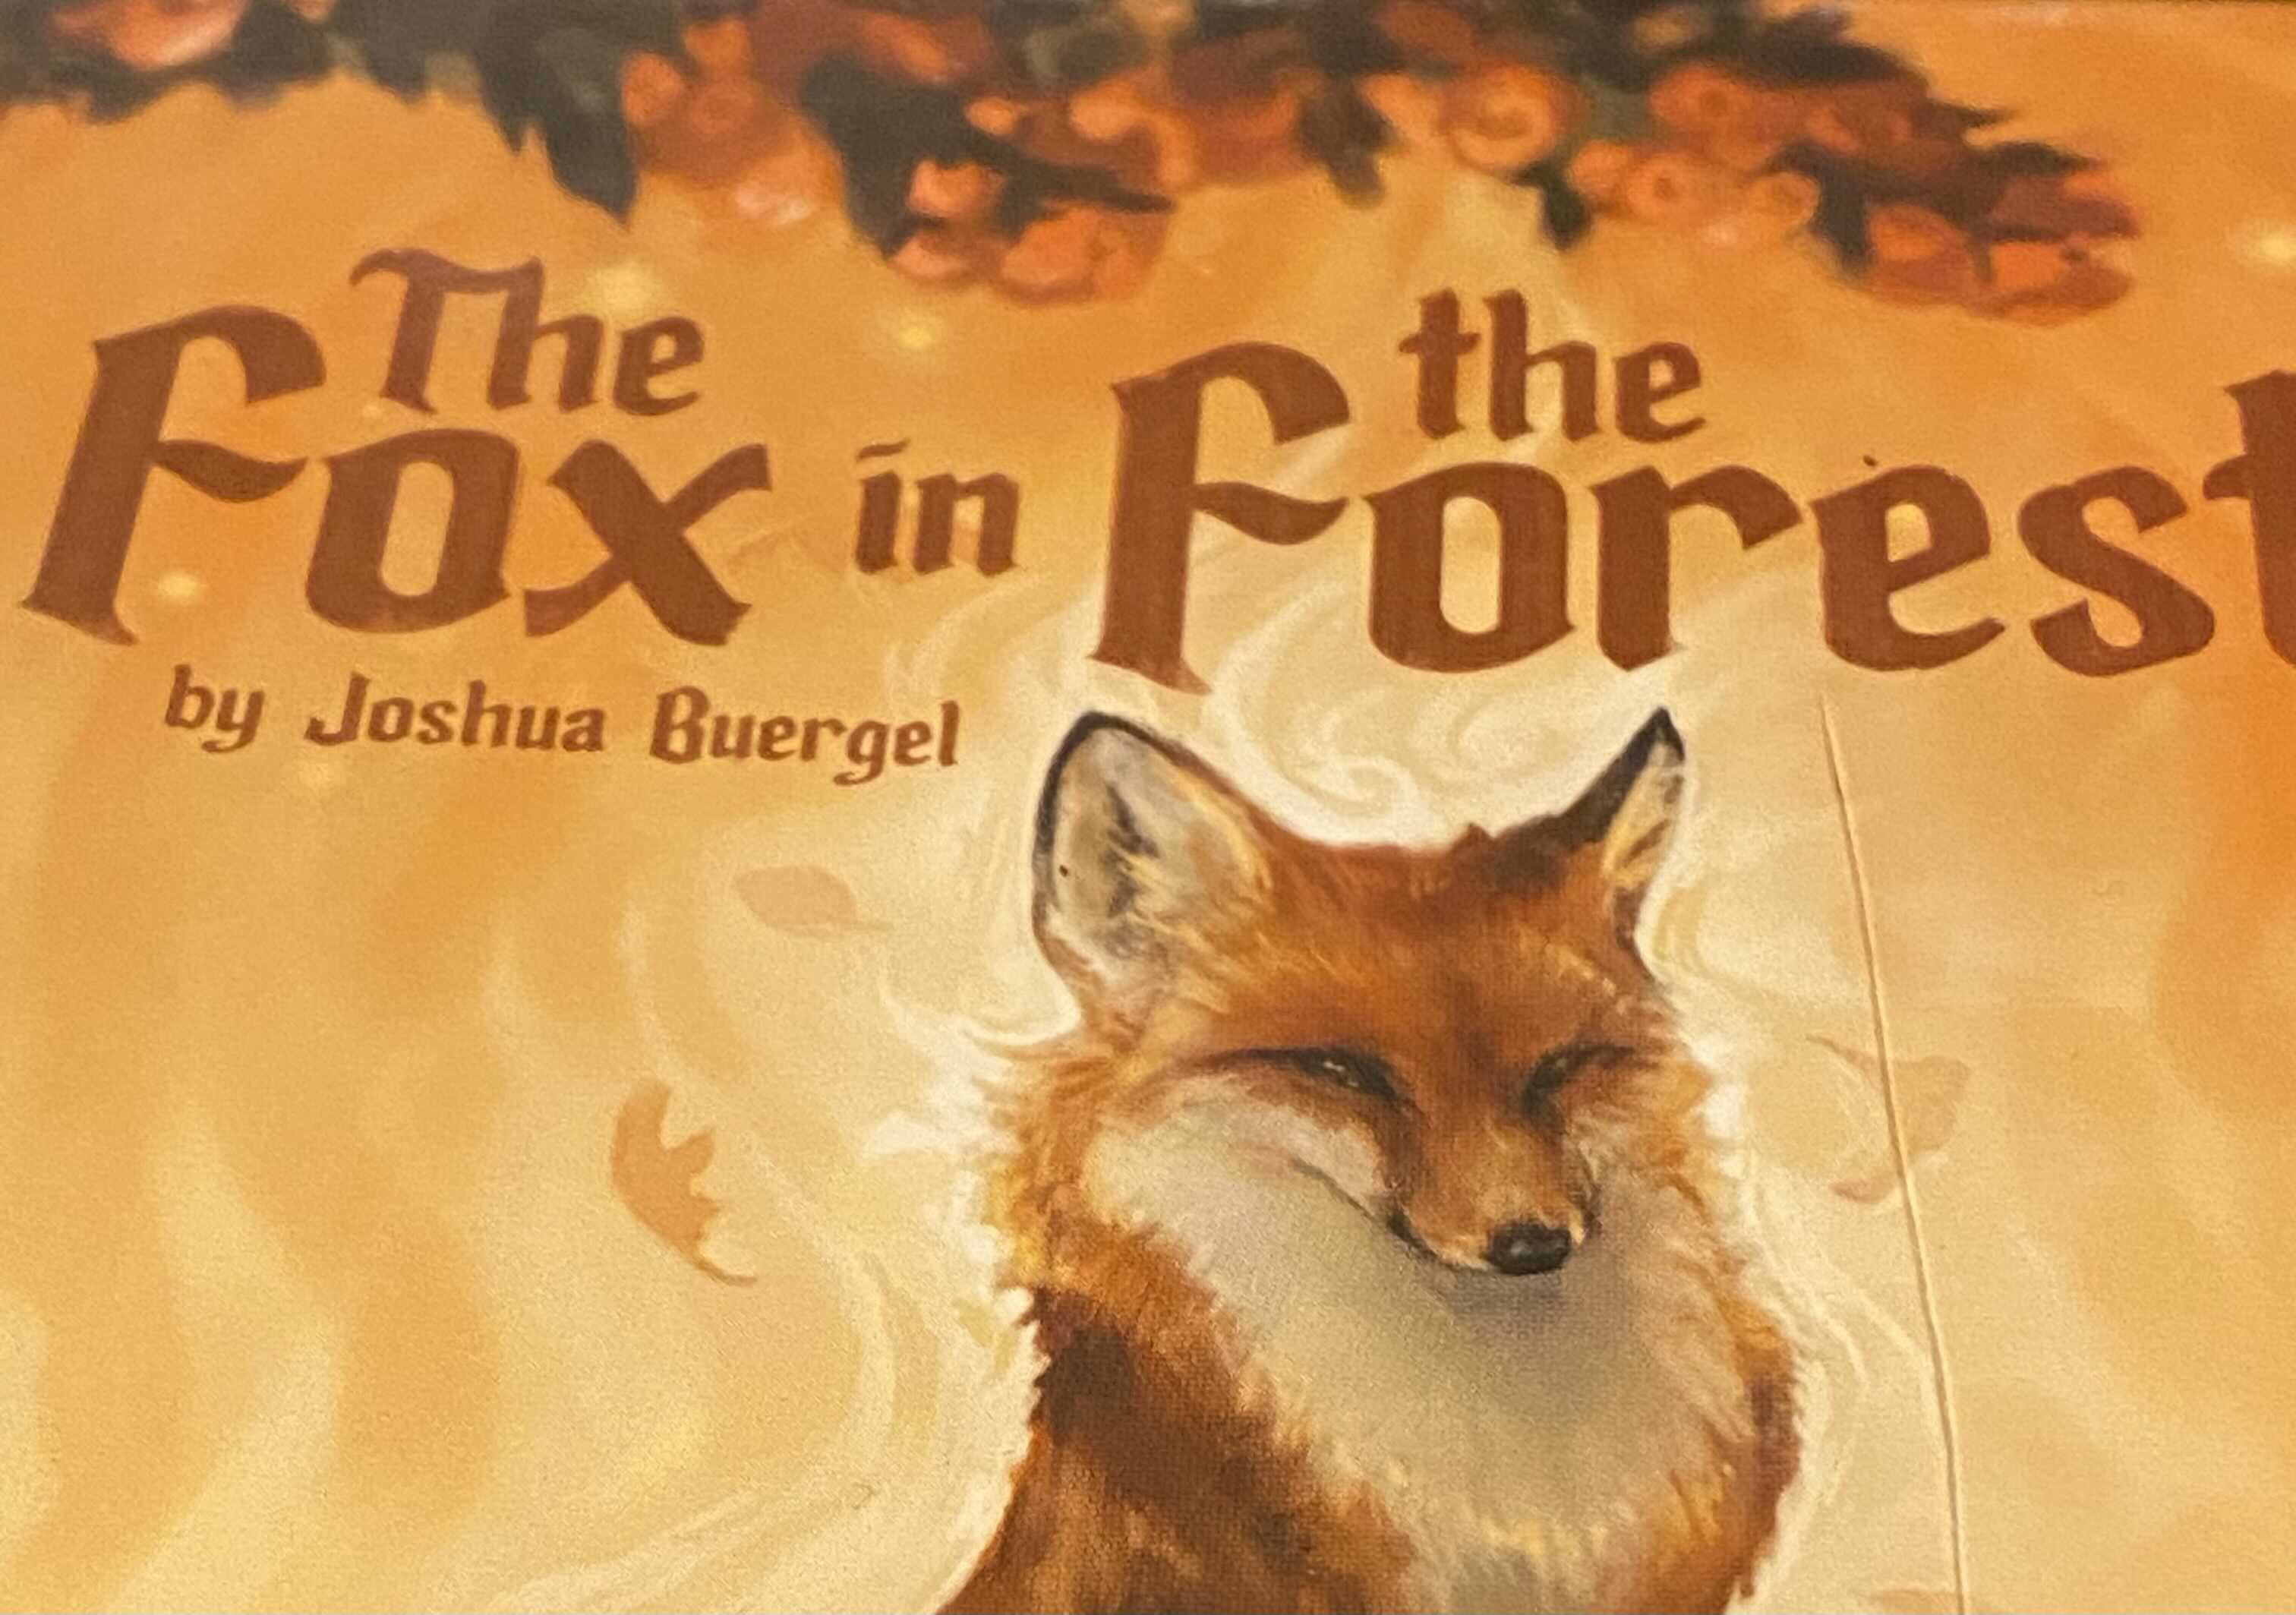 The Title "The Fox in the Forest" sits above a Fox, sitting proudly